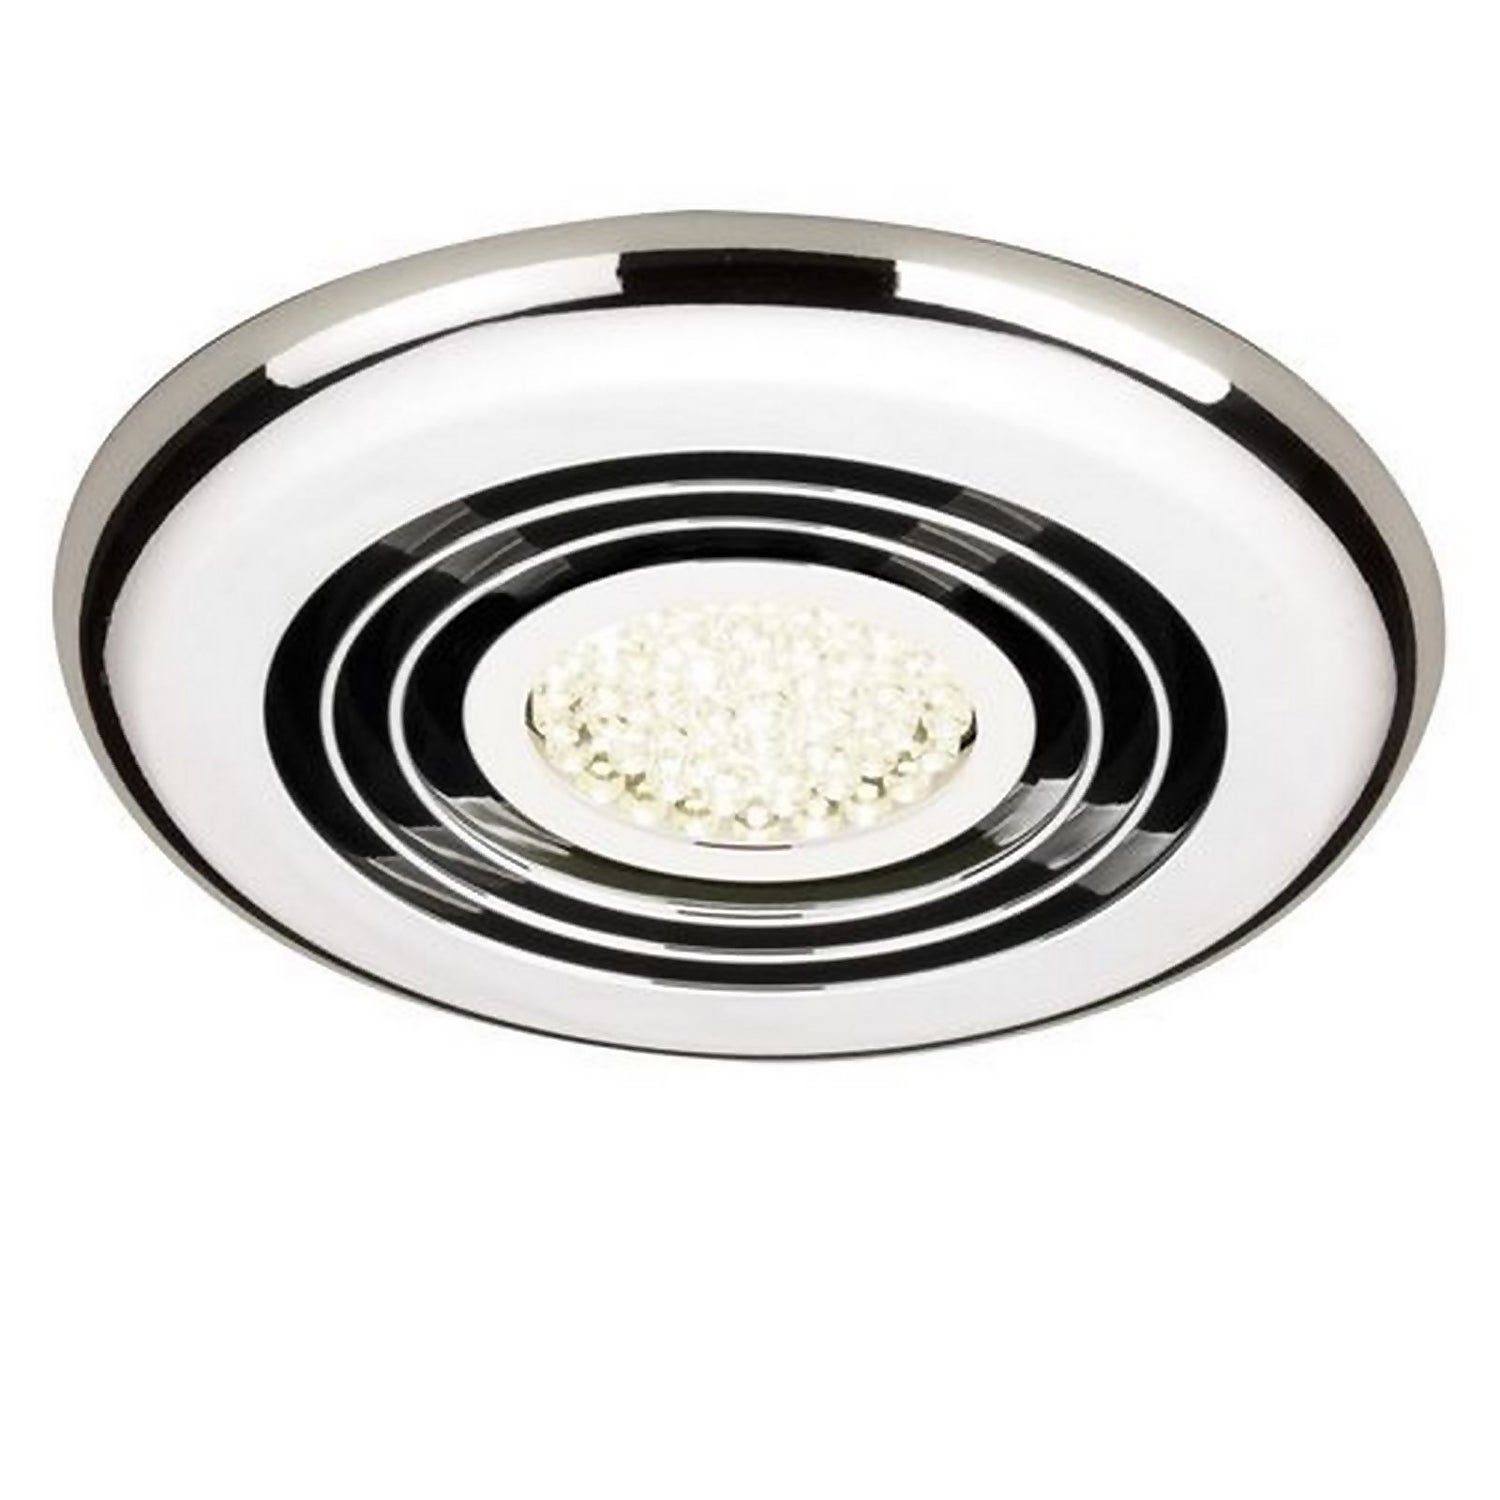 Rapide Inline Ceiling Mounted Bathroom Extractor Fan with LED Lighting - Chrome